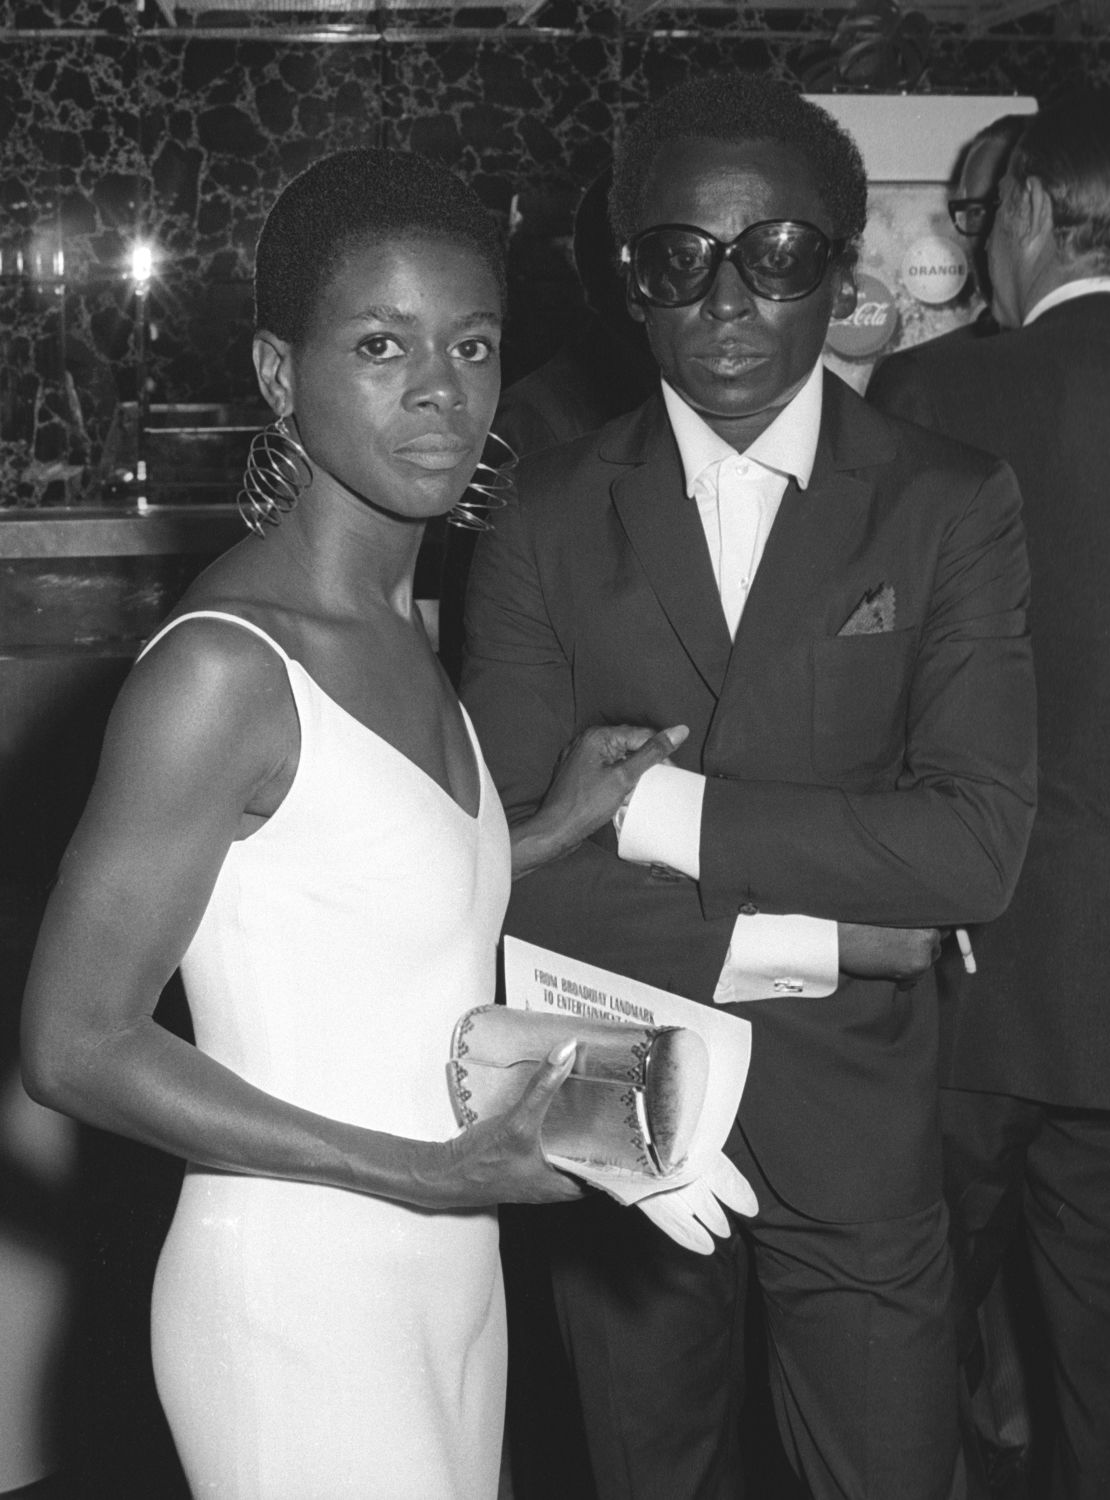 Cicely Tyson and musician Miles Davis attend the premiere of "The Heart Is A Lonely Hunter" on July 31st 1968 in New York City.